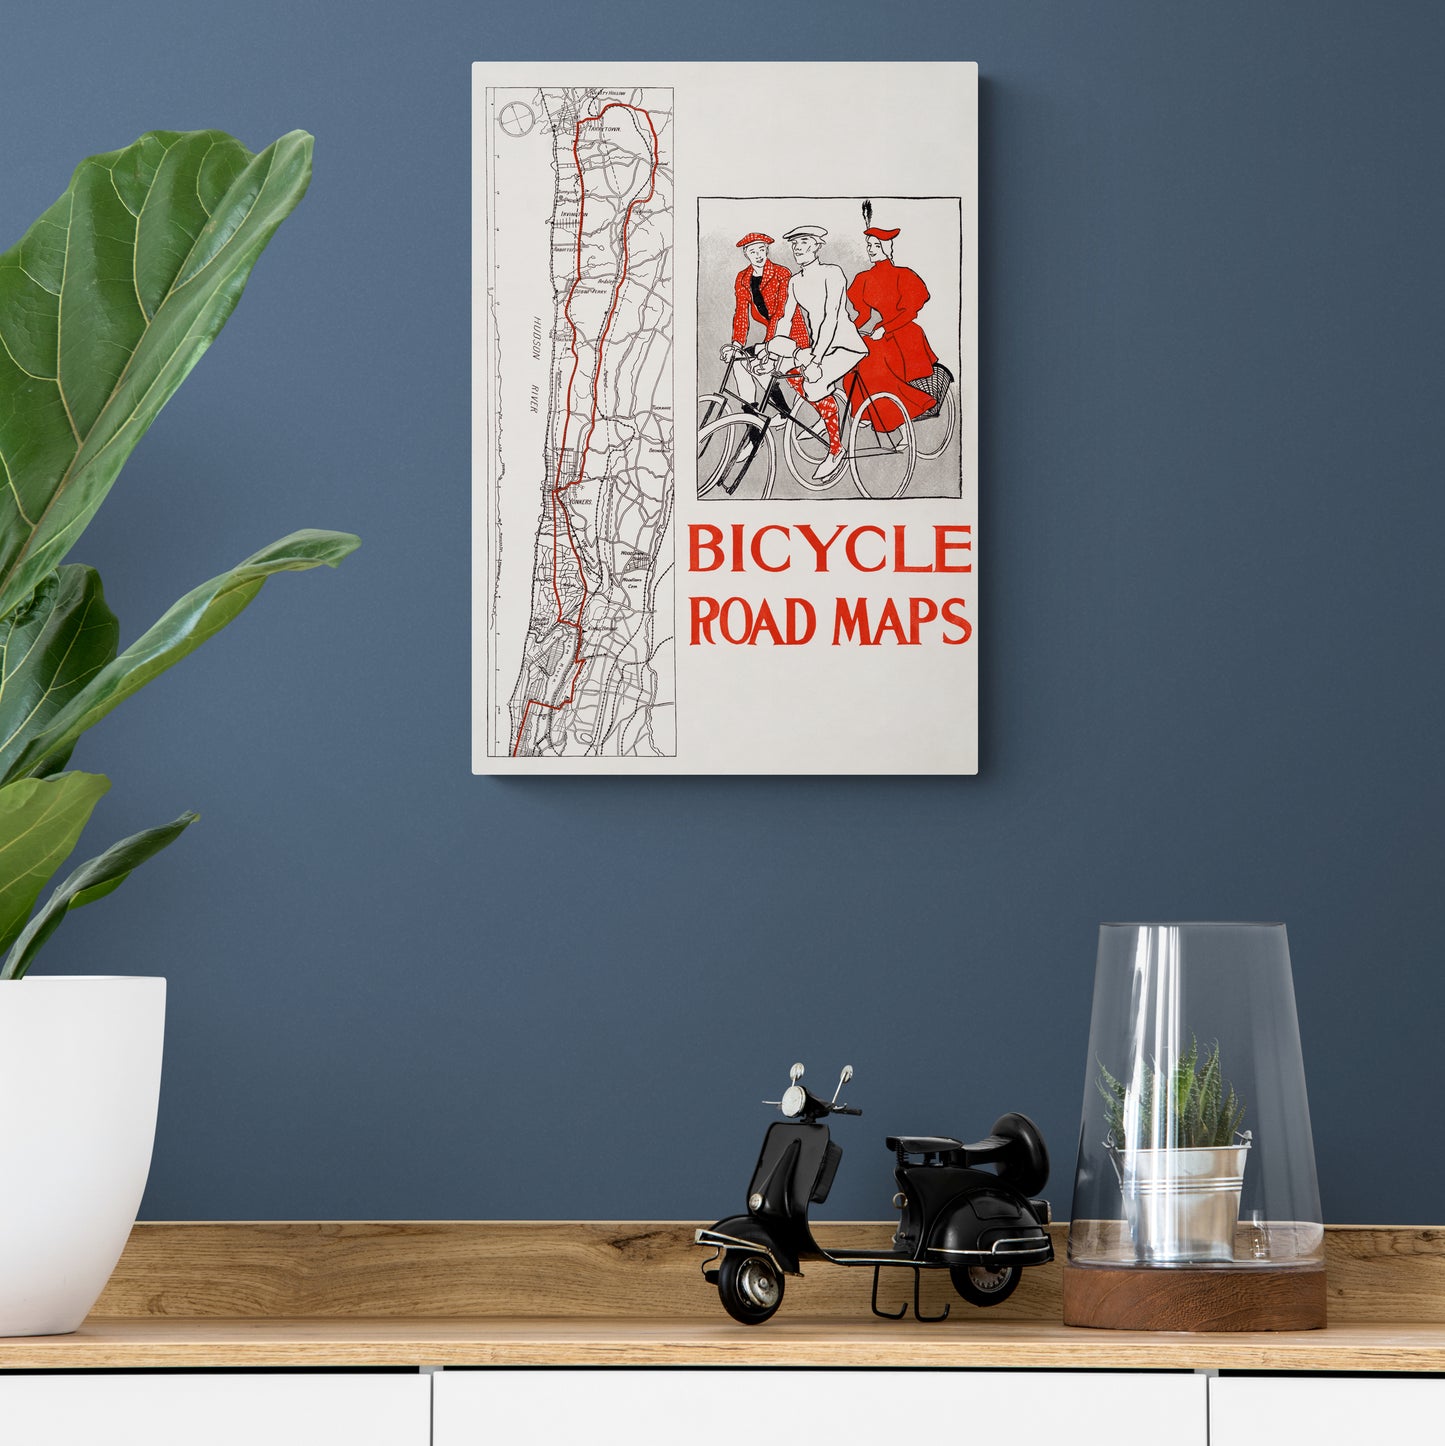 Bicycle Road Maps by Edward Penfield